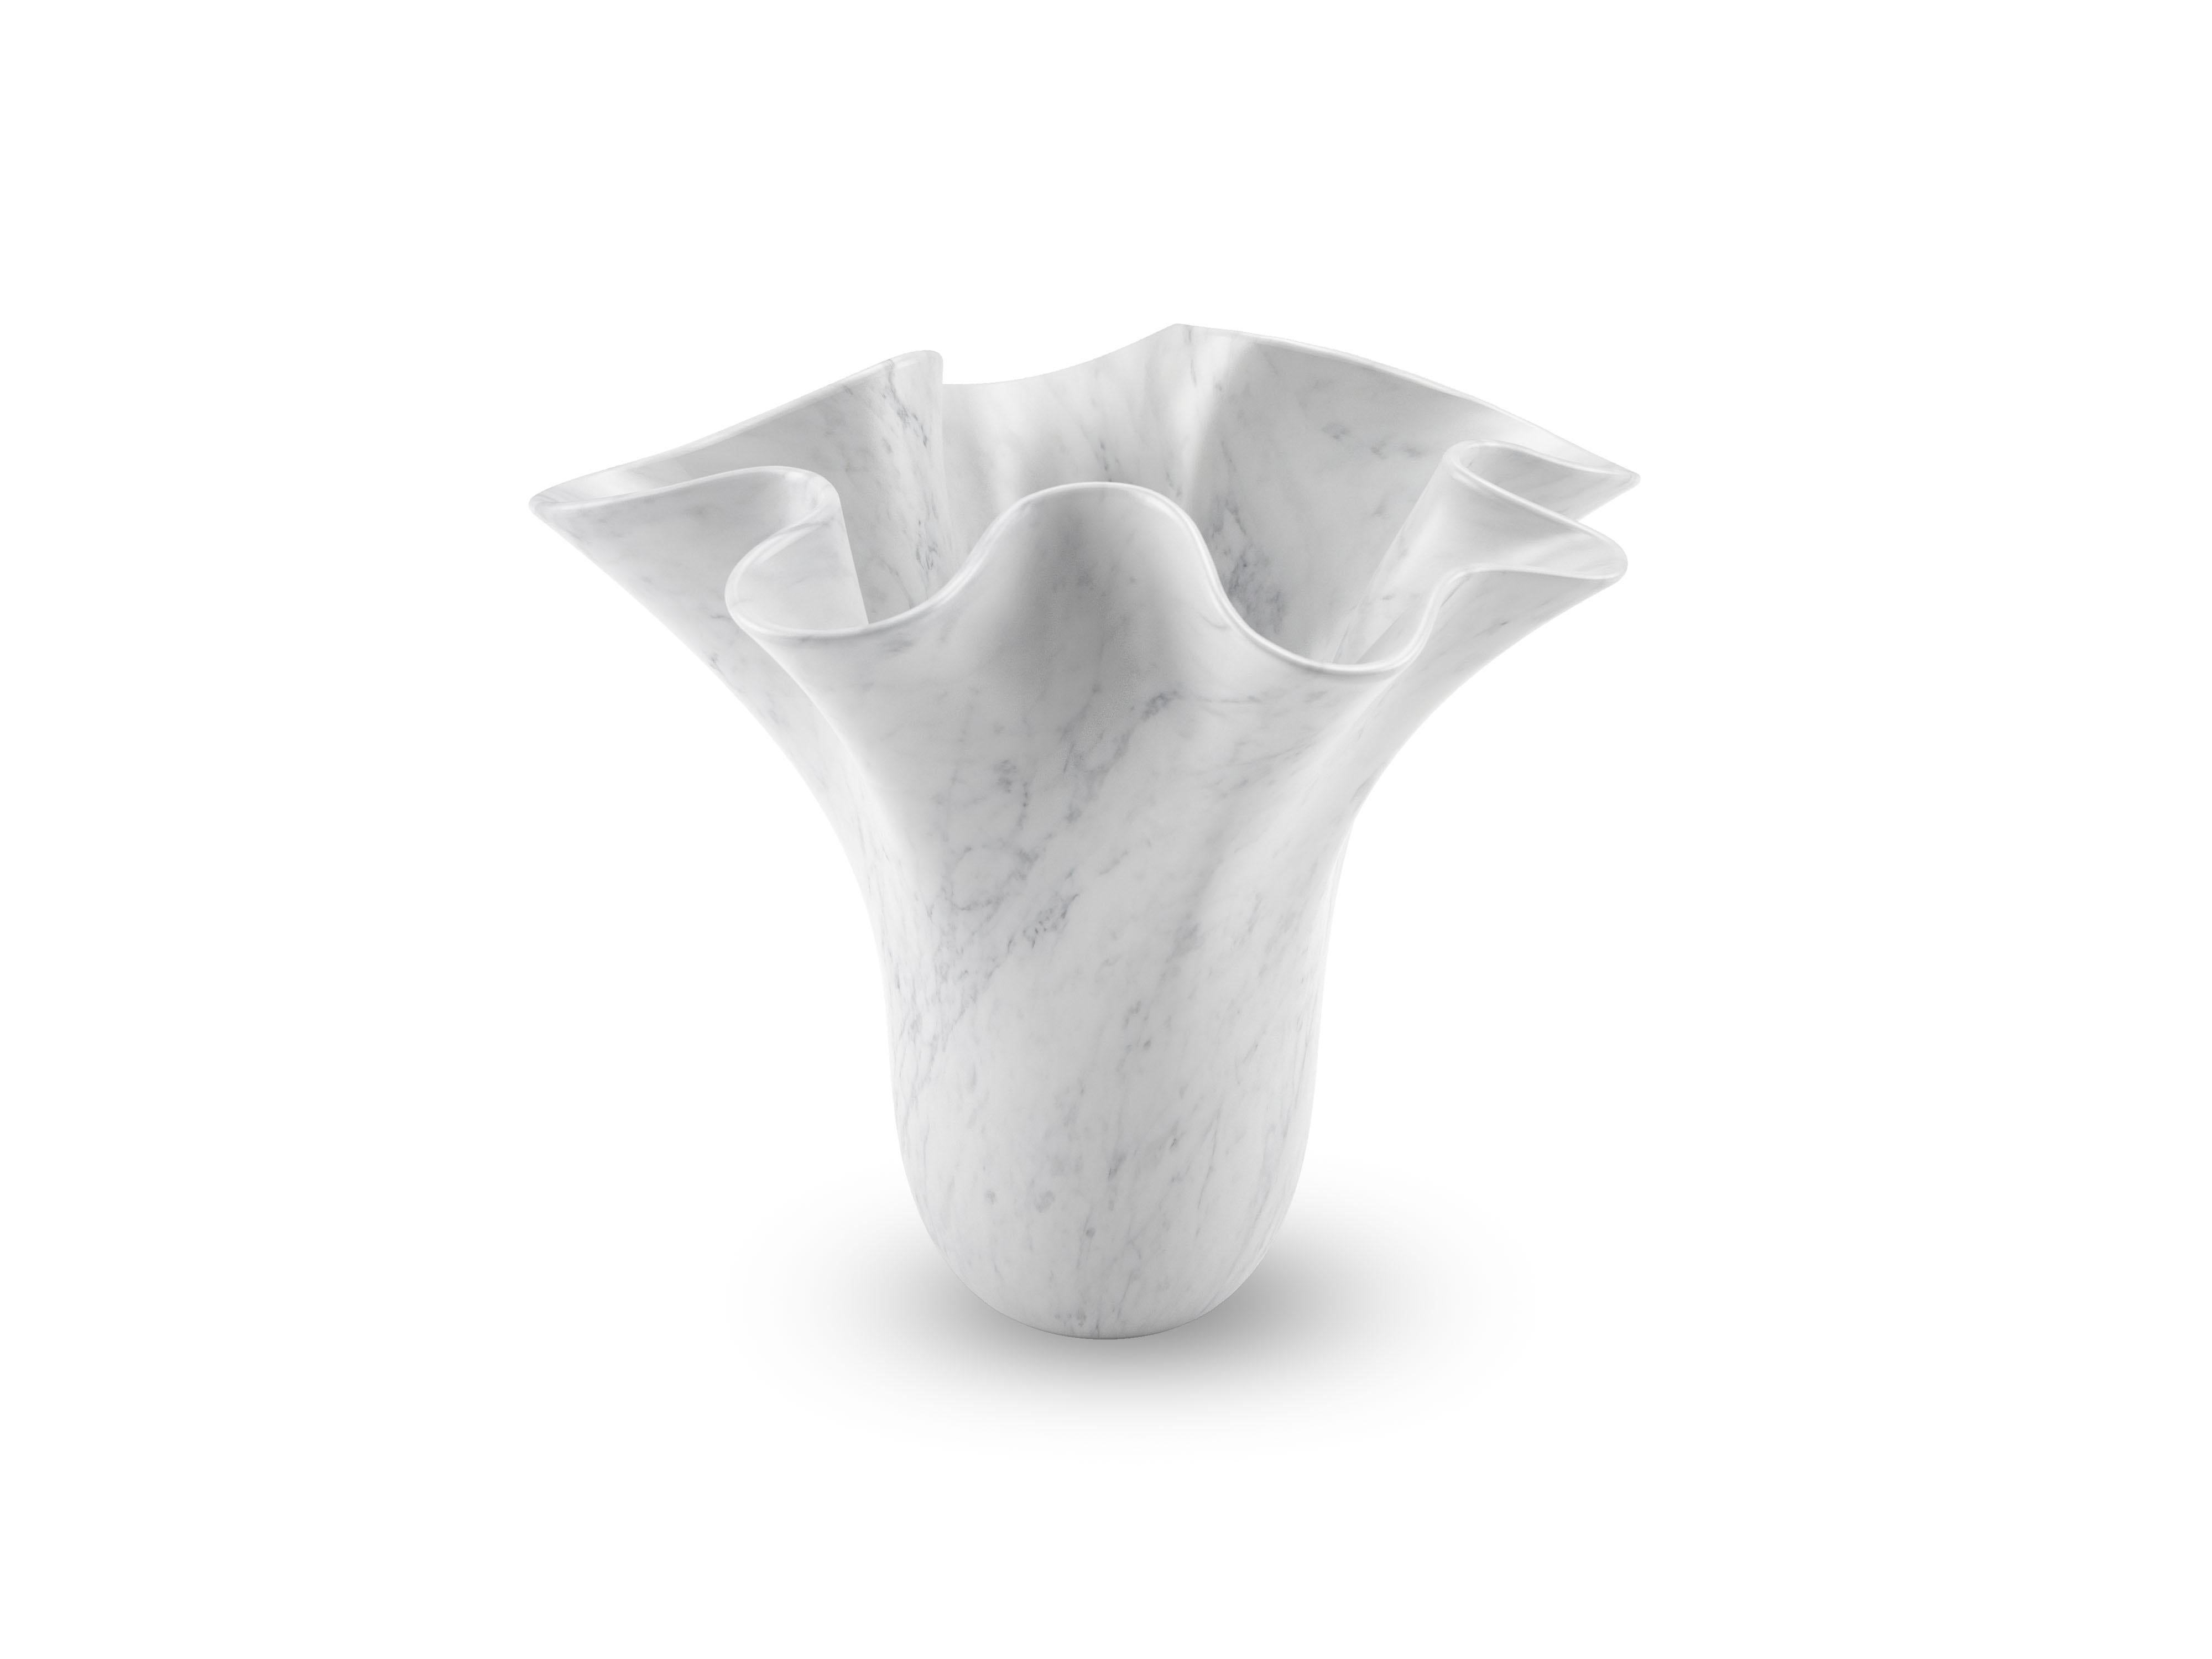 Sculptural vase carved by hand from a solid block of white Carrara marble, velvet finish. This vase reproduces, in a smaller version, the iconic sculptural vase PV05 designed by the Atelier Barberini & Gunnell, hand made in a limited edition for the